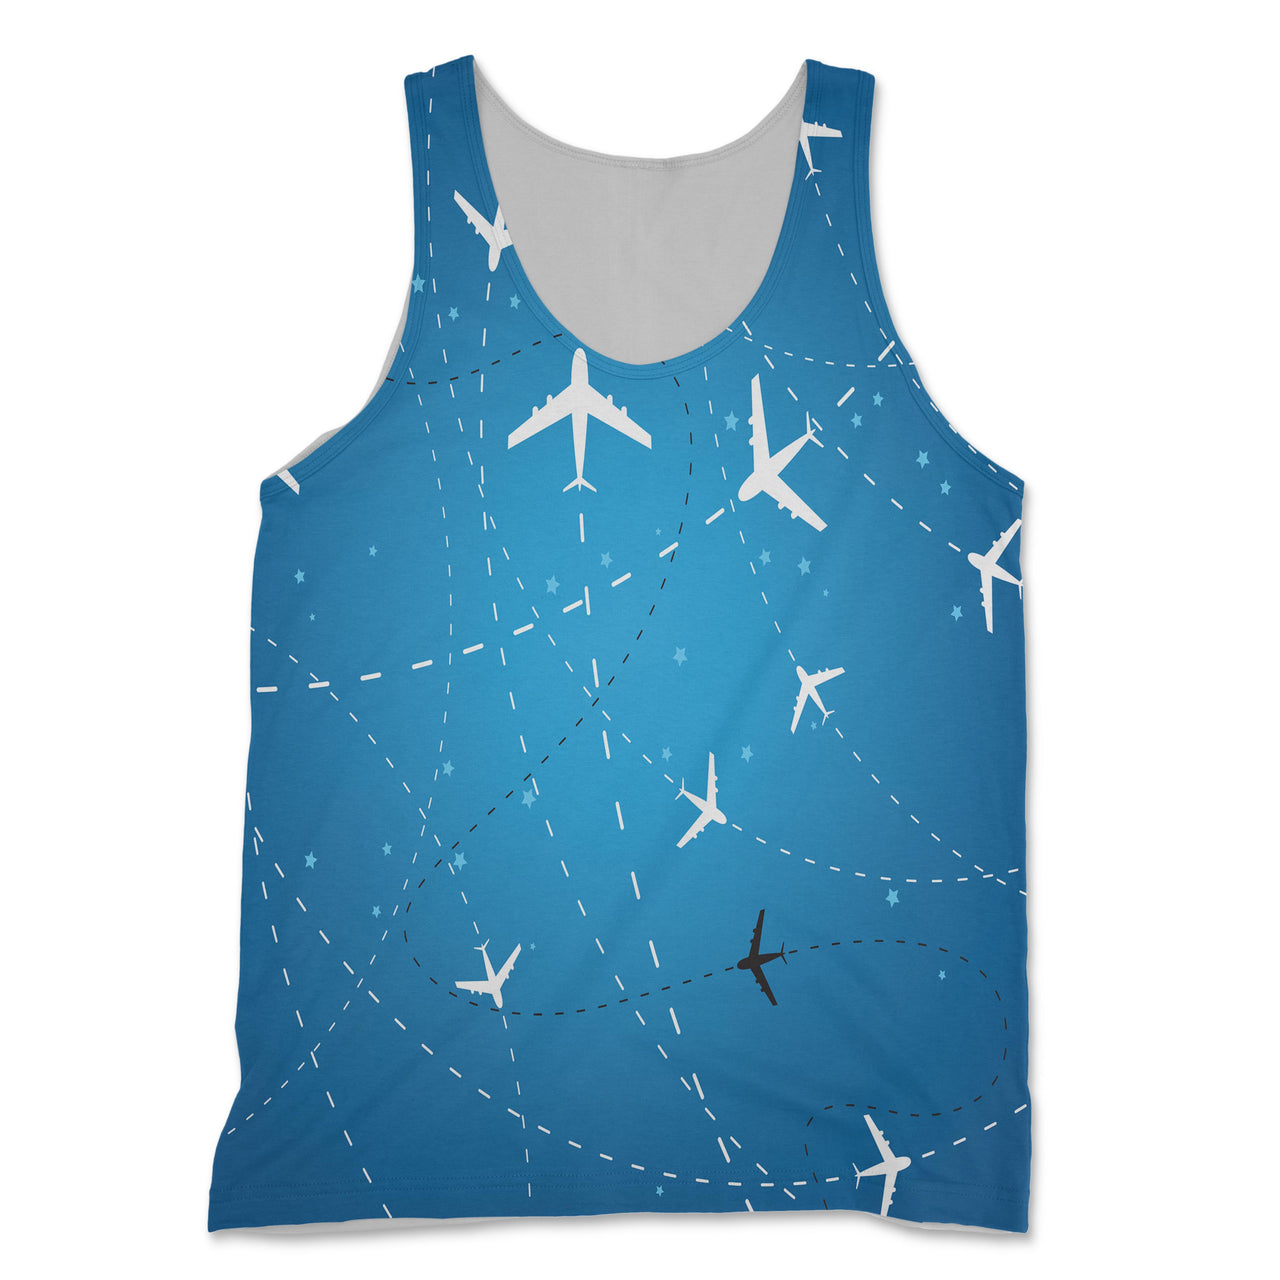 Travelling with Aircraft Designed 3D Tank Tops